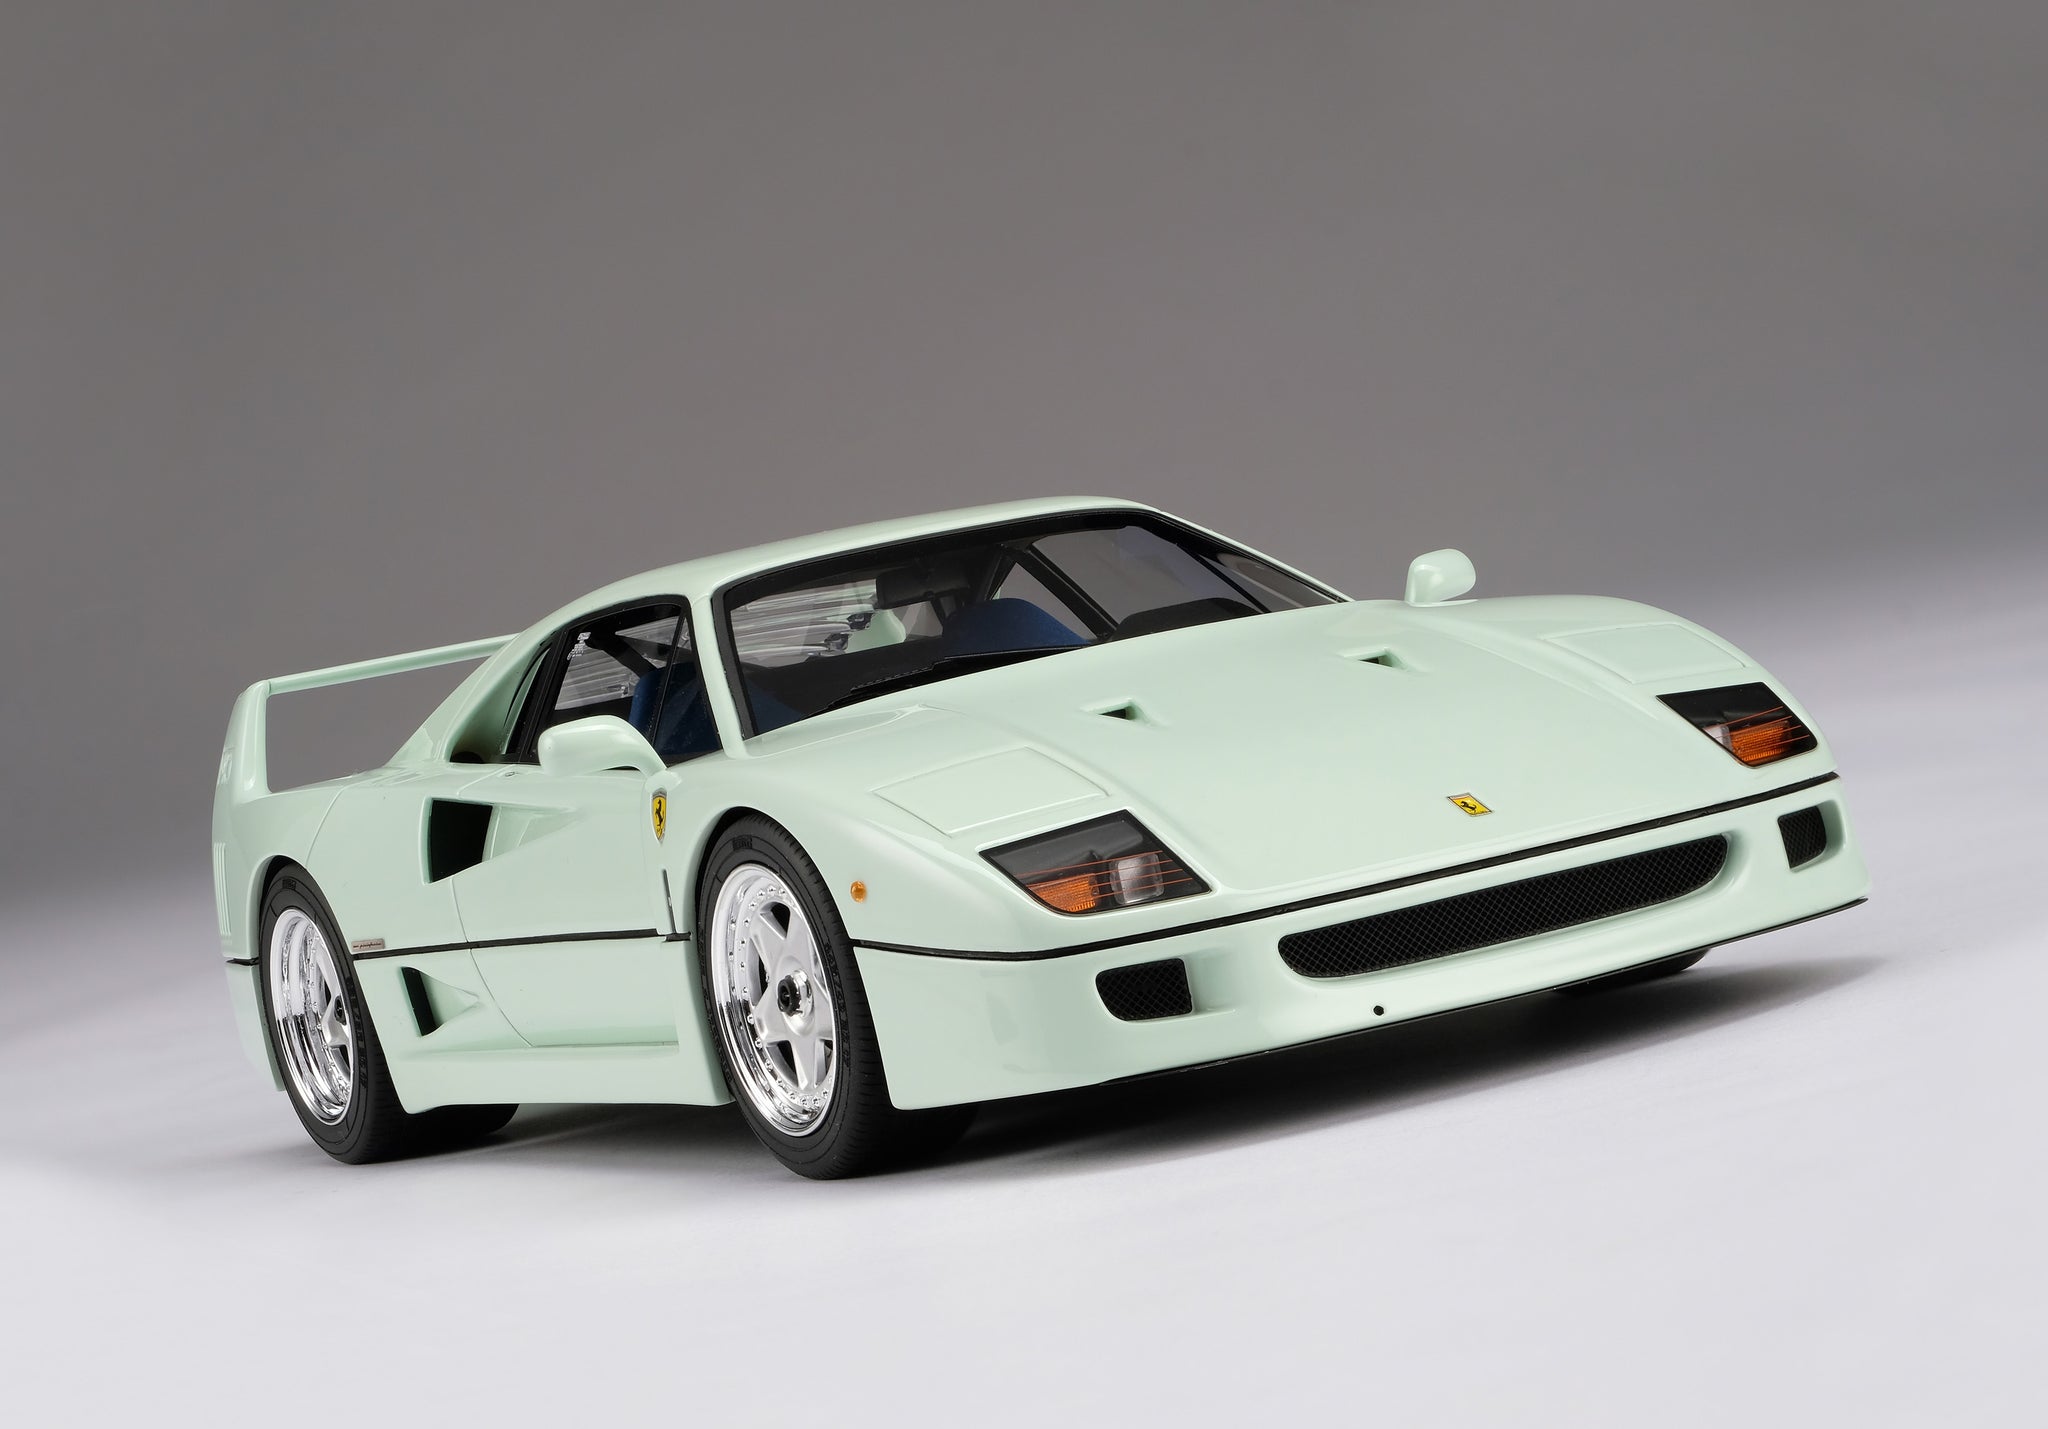 'Minty Forty' Ferrari F40 at 1:18 scale